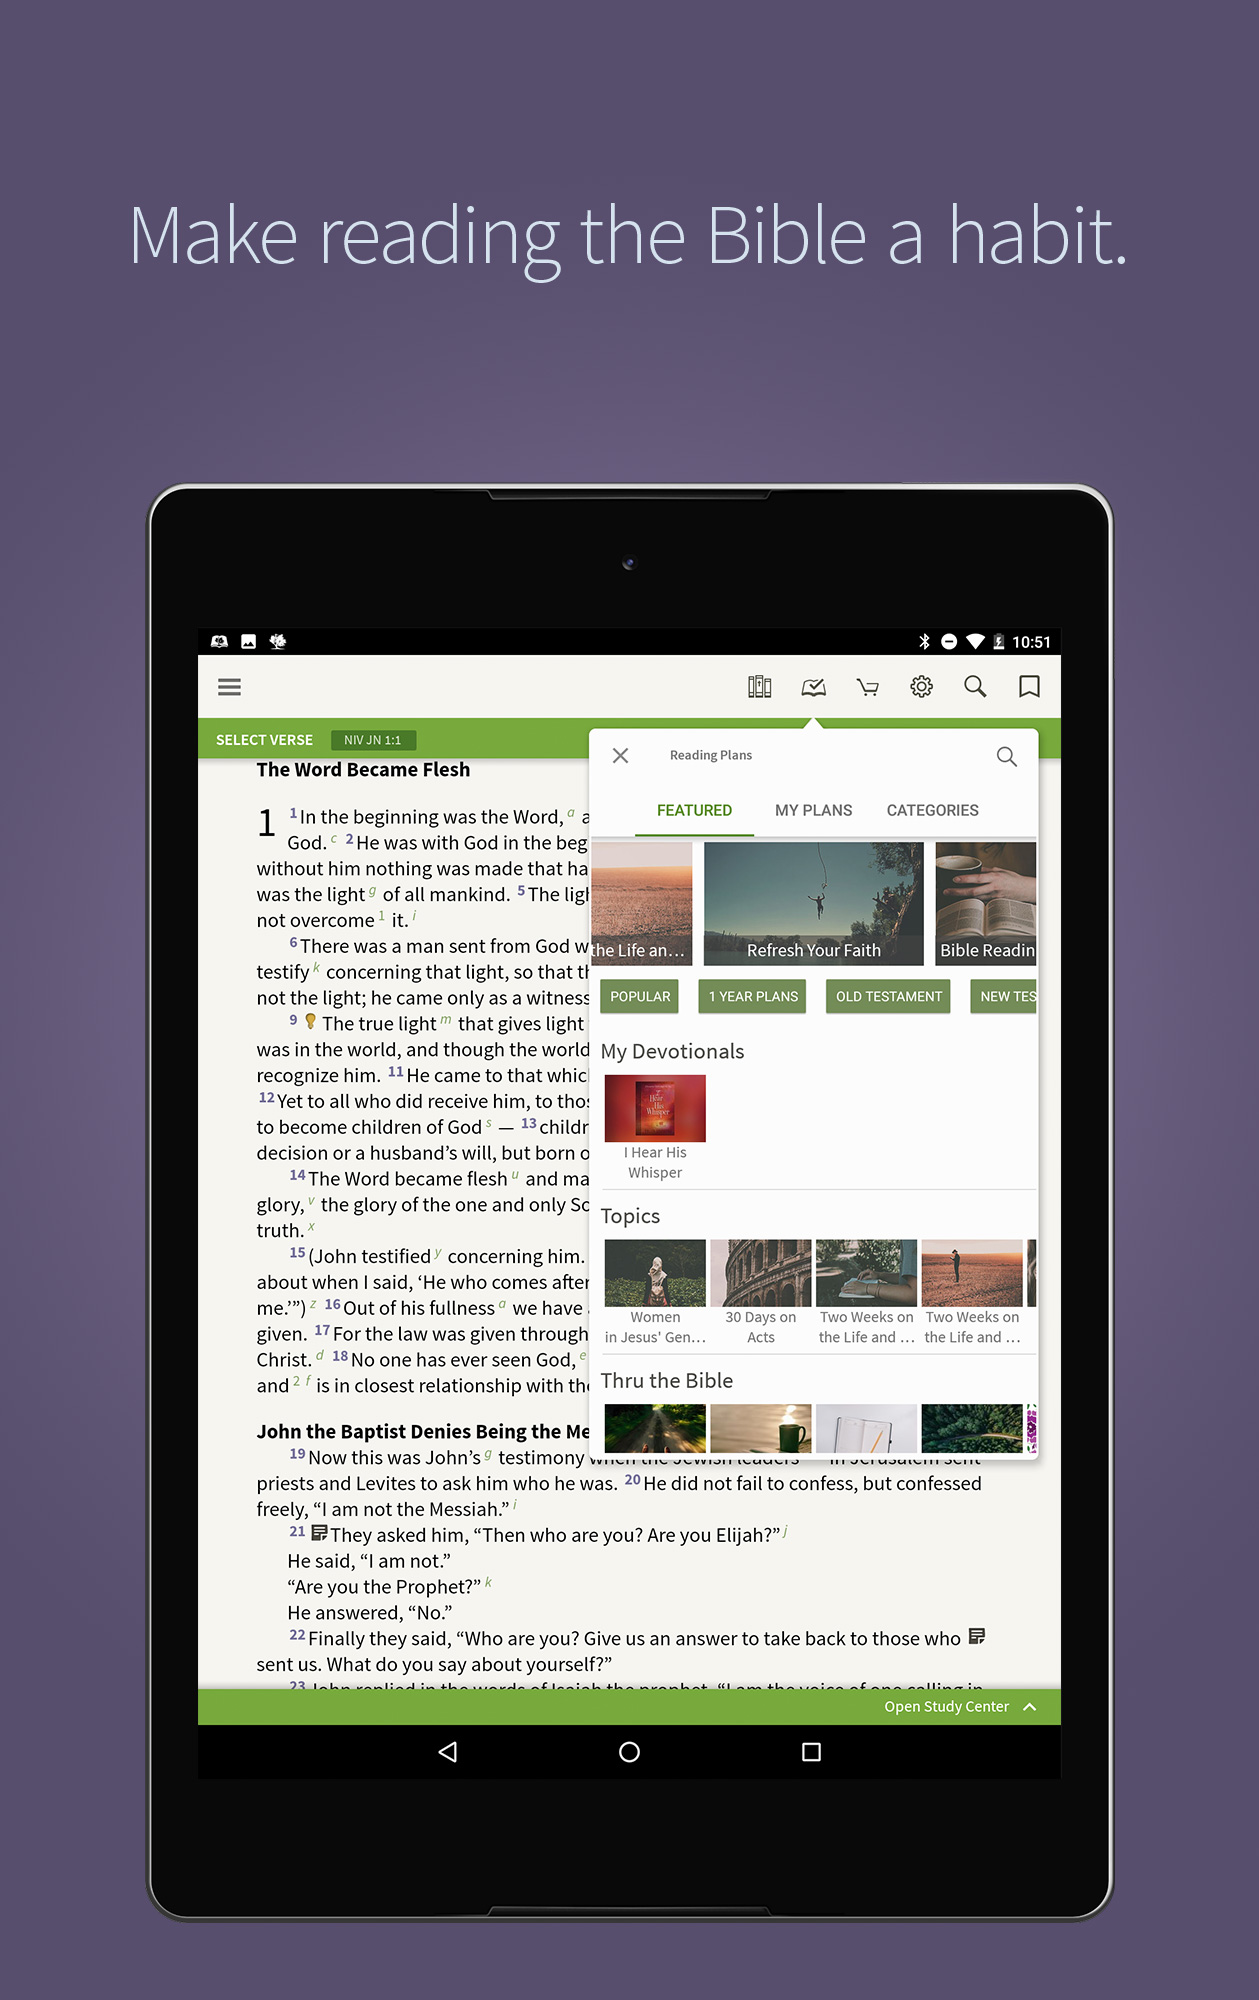 Olive Tree Bible App on Android - Olive Tree Blog